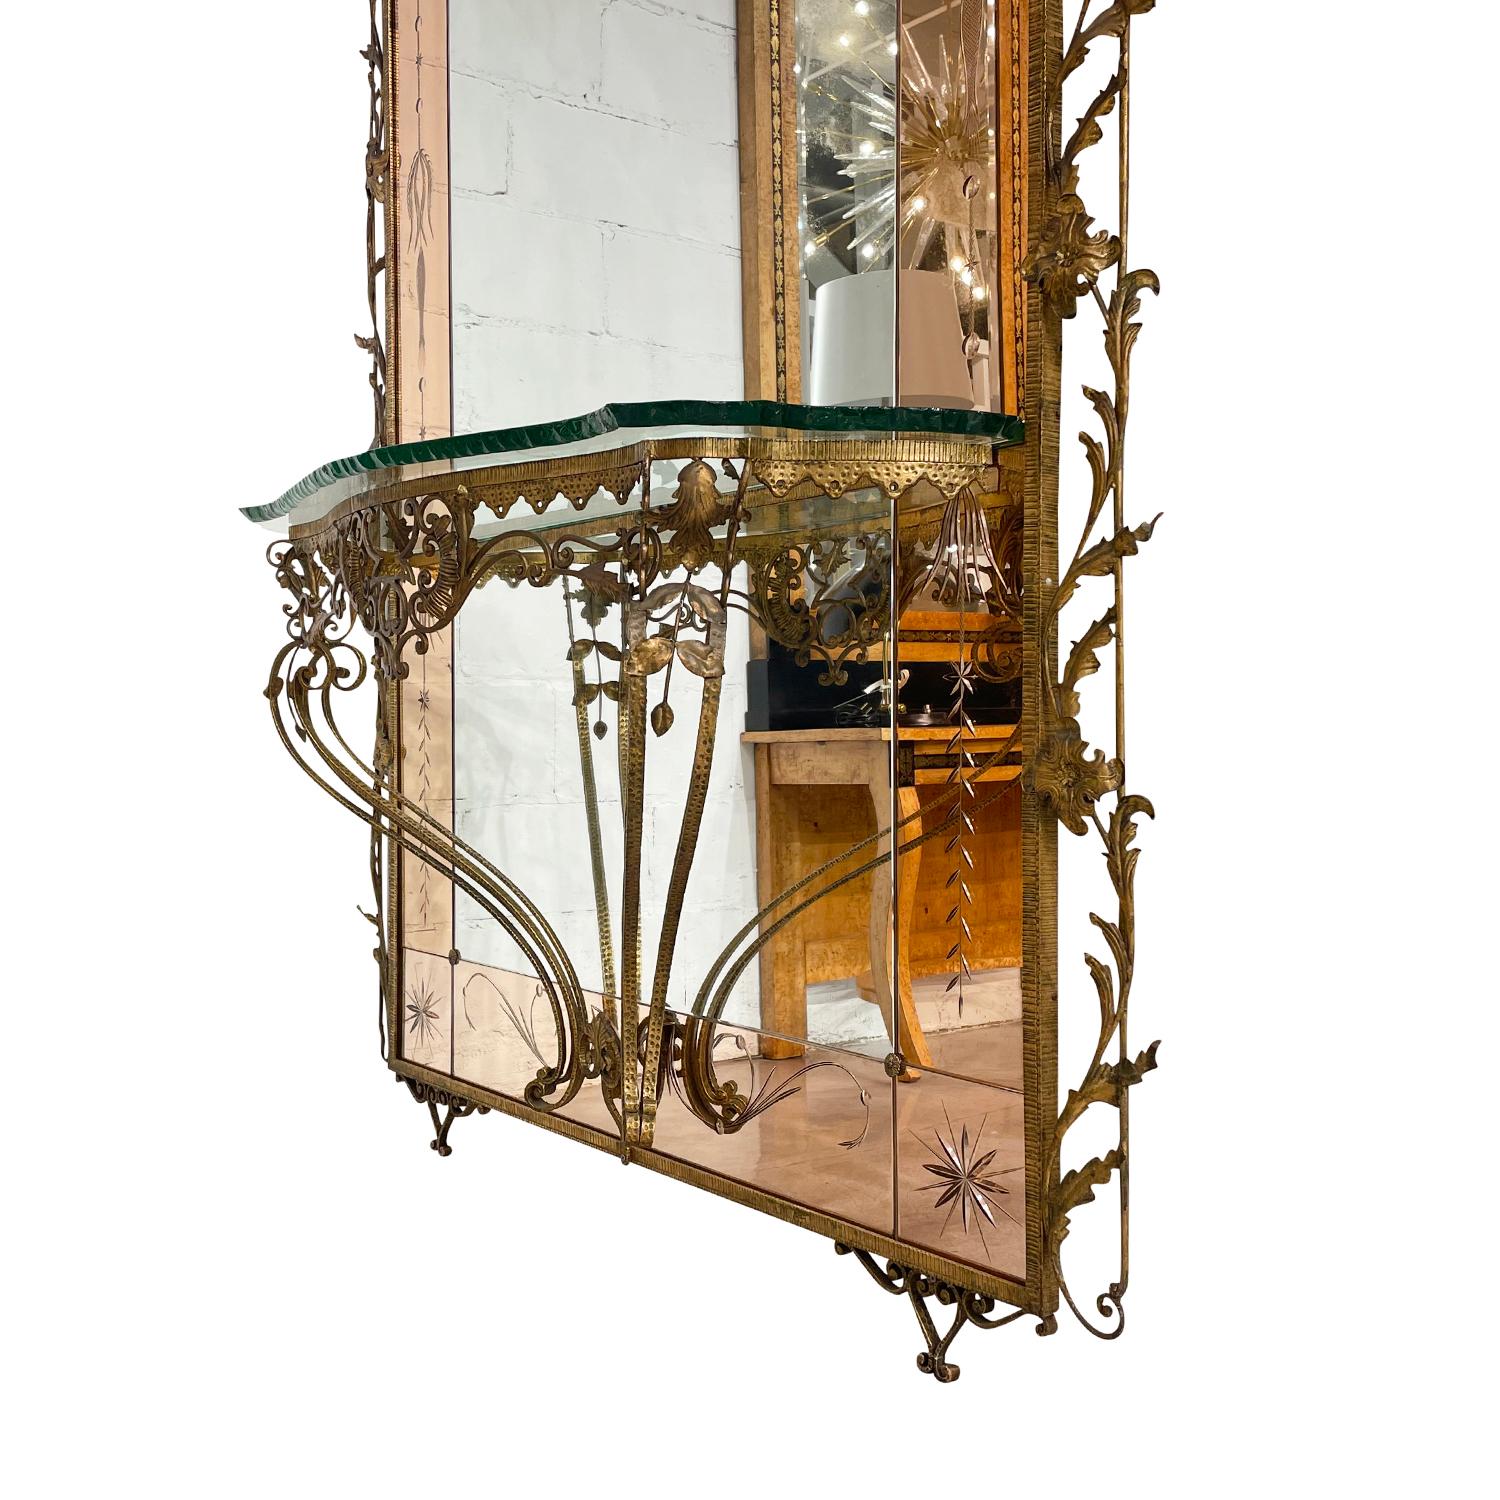 20th Century Italian Iron Floor Glass Mirror, Console Table by Pier Luigi Colli In Good Condition For Sale In West Palm Beach, FL